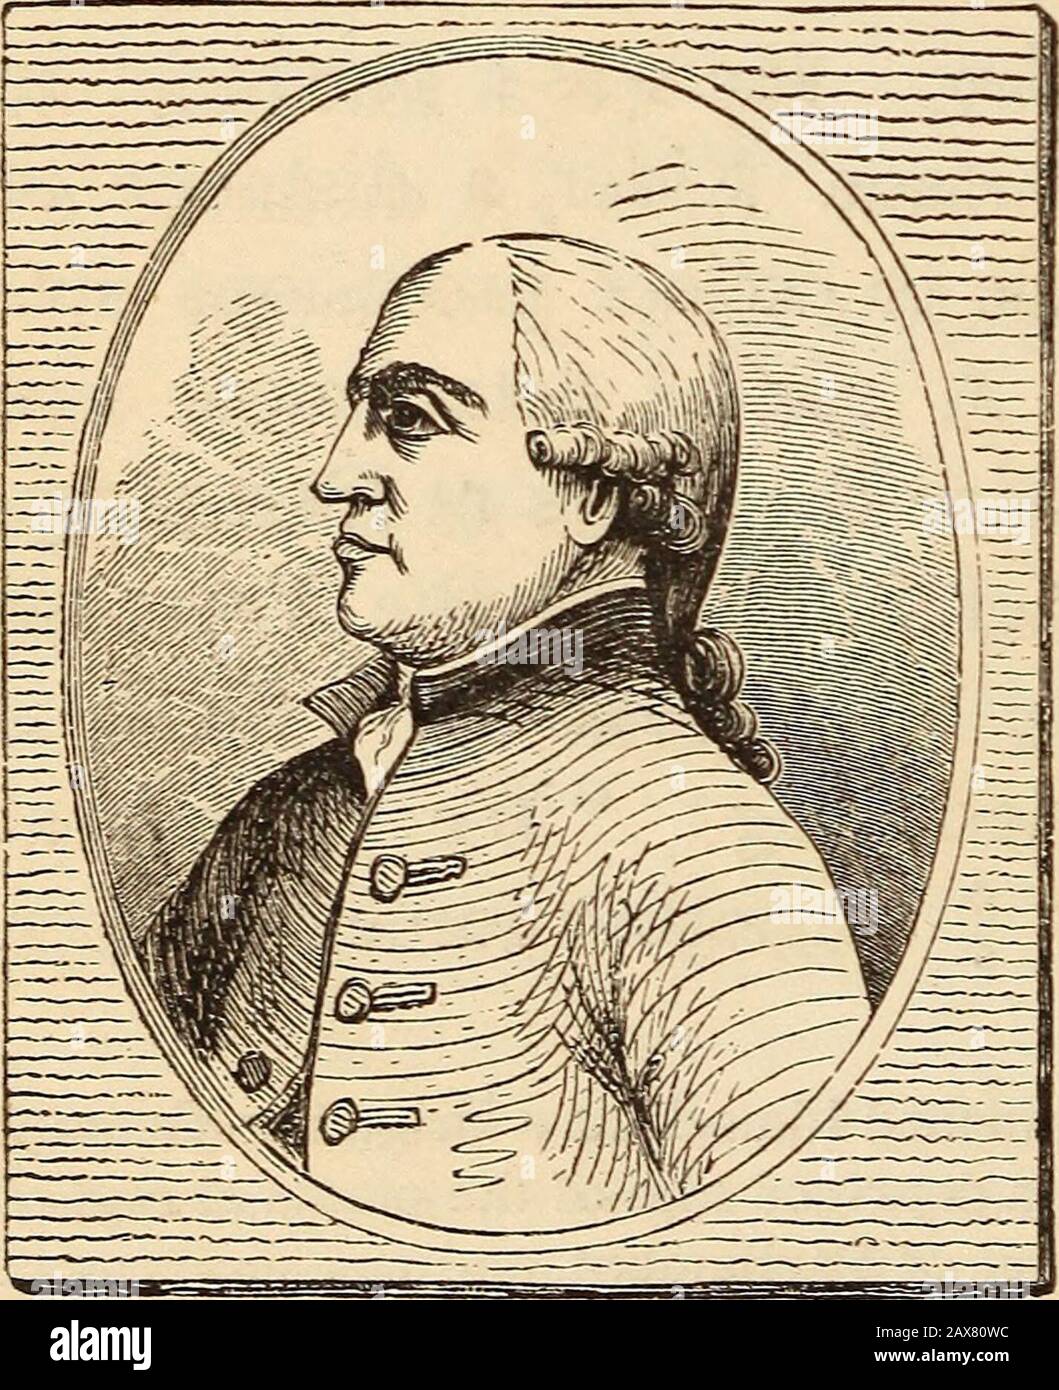 New school history of the United States . de atOriskany, and was mortally wounded. On the approachof Arnold, the Indians deserted, and the expedition of St.Legers was completely frustrated. General Schuyler wasremoved from the command of the American army in theNorth, as disaster was ascribed to his indecision and incapac-ity. Horatio Gates,* a man more vain, but not more able,was appointed in his place. THE SURRENDER OF BURGOYNE. 55. Both wings of Burgoynes army had thus beendefeated. His force was reduced to 6,000 men. Washing-ton had sent some of his best officers to oppose him—Arnold, ^ Li Stock Photo